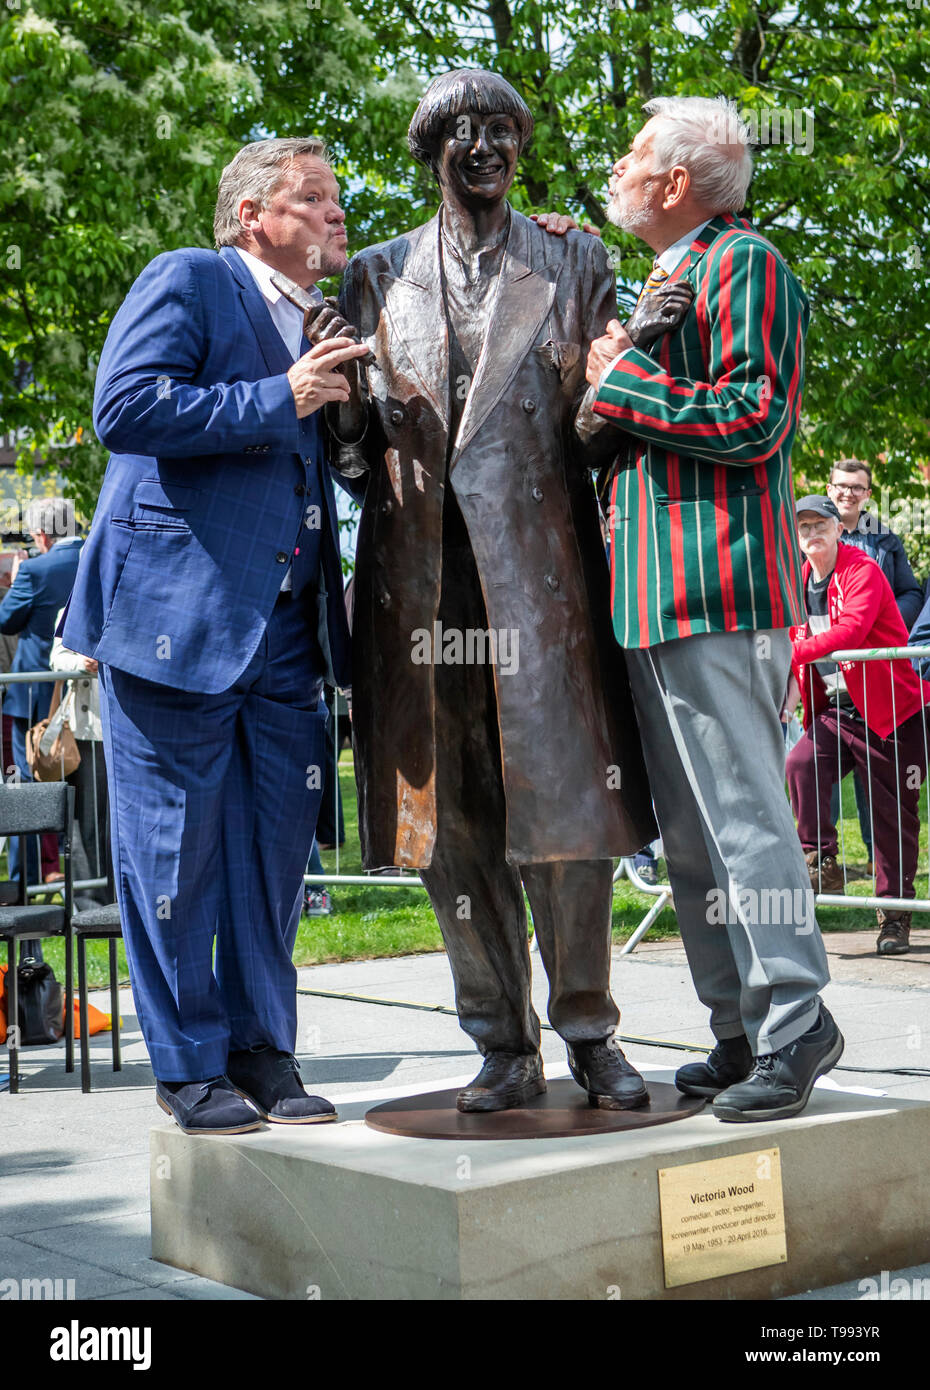 A life-size bronze statue of the late comedian, writer and actor, Victoria Wood is given a flying kiss during its unveiling in Bury town centre by comedian Ted Robbins (left) and her brother Chris Foote Wood. Stock Photo